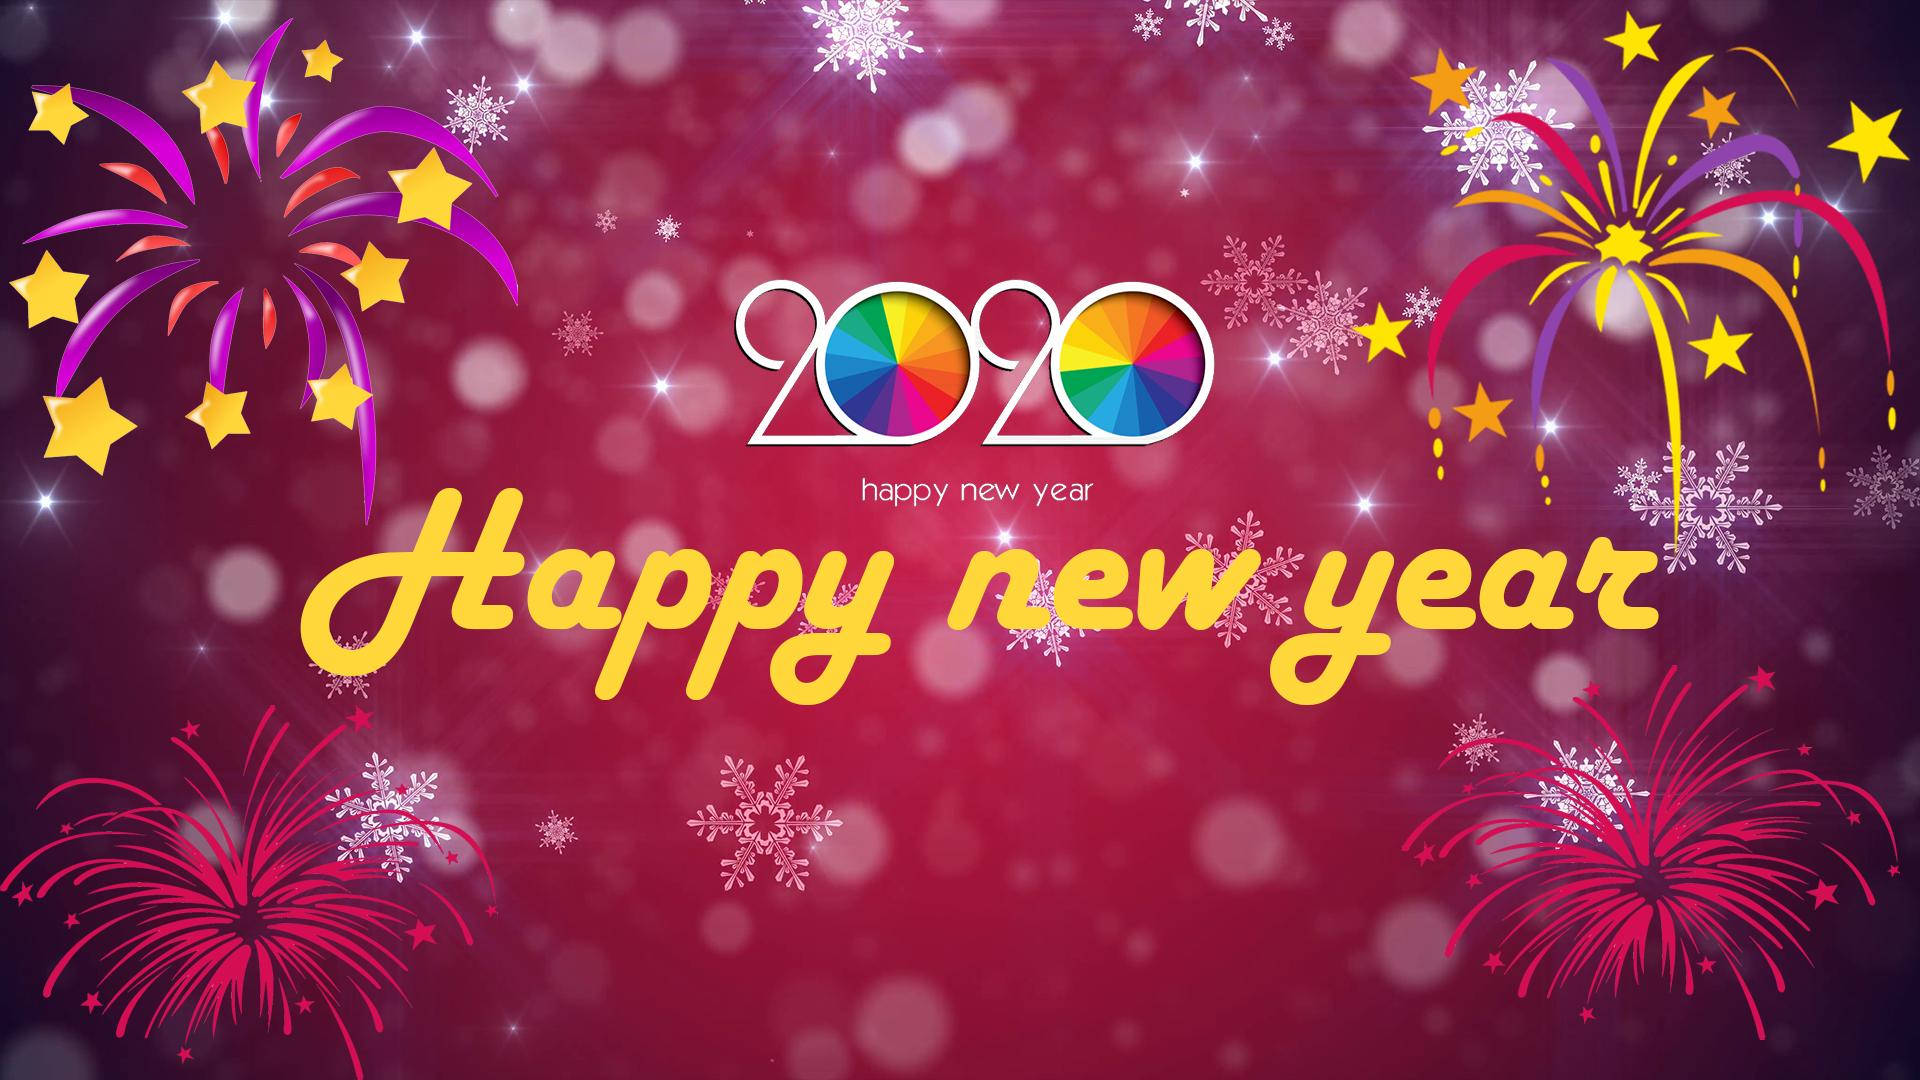 Wishing you a Happy New Year 2020 Wallpaper